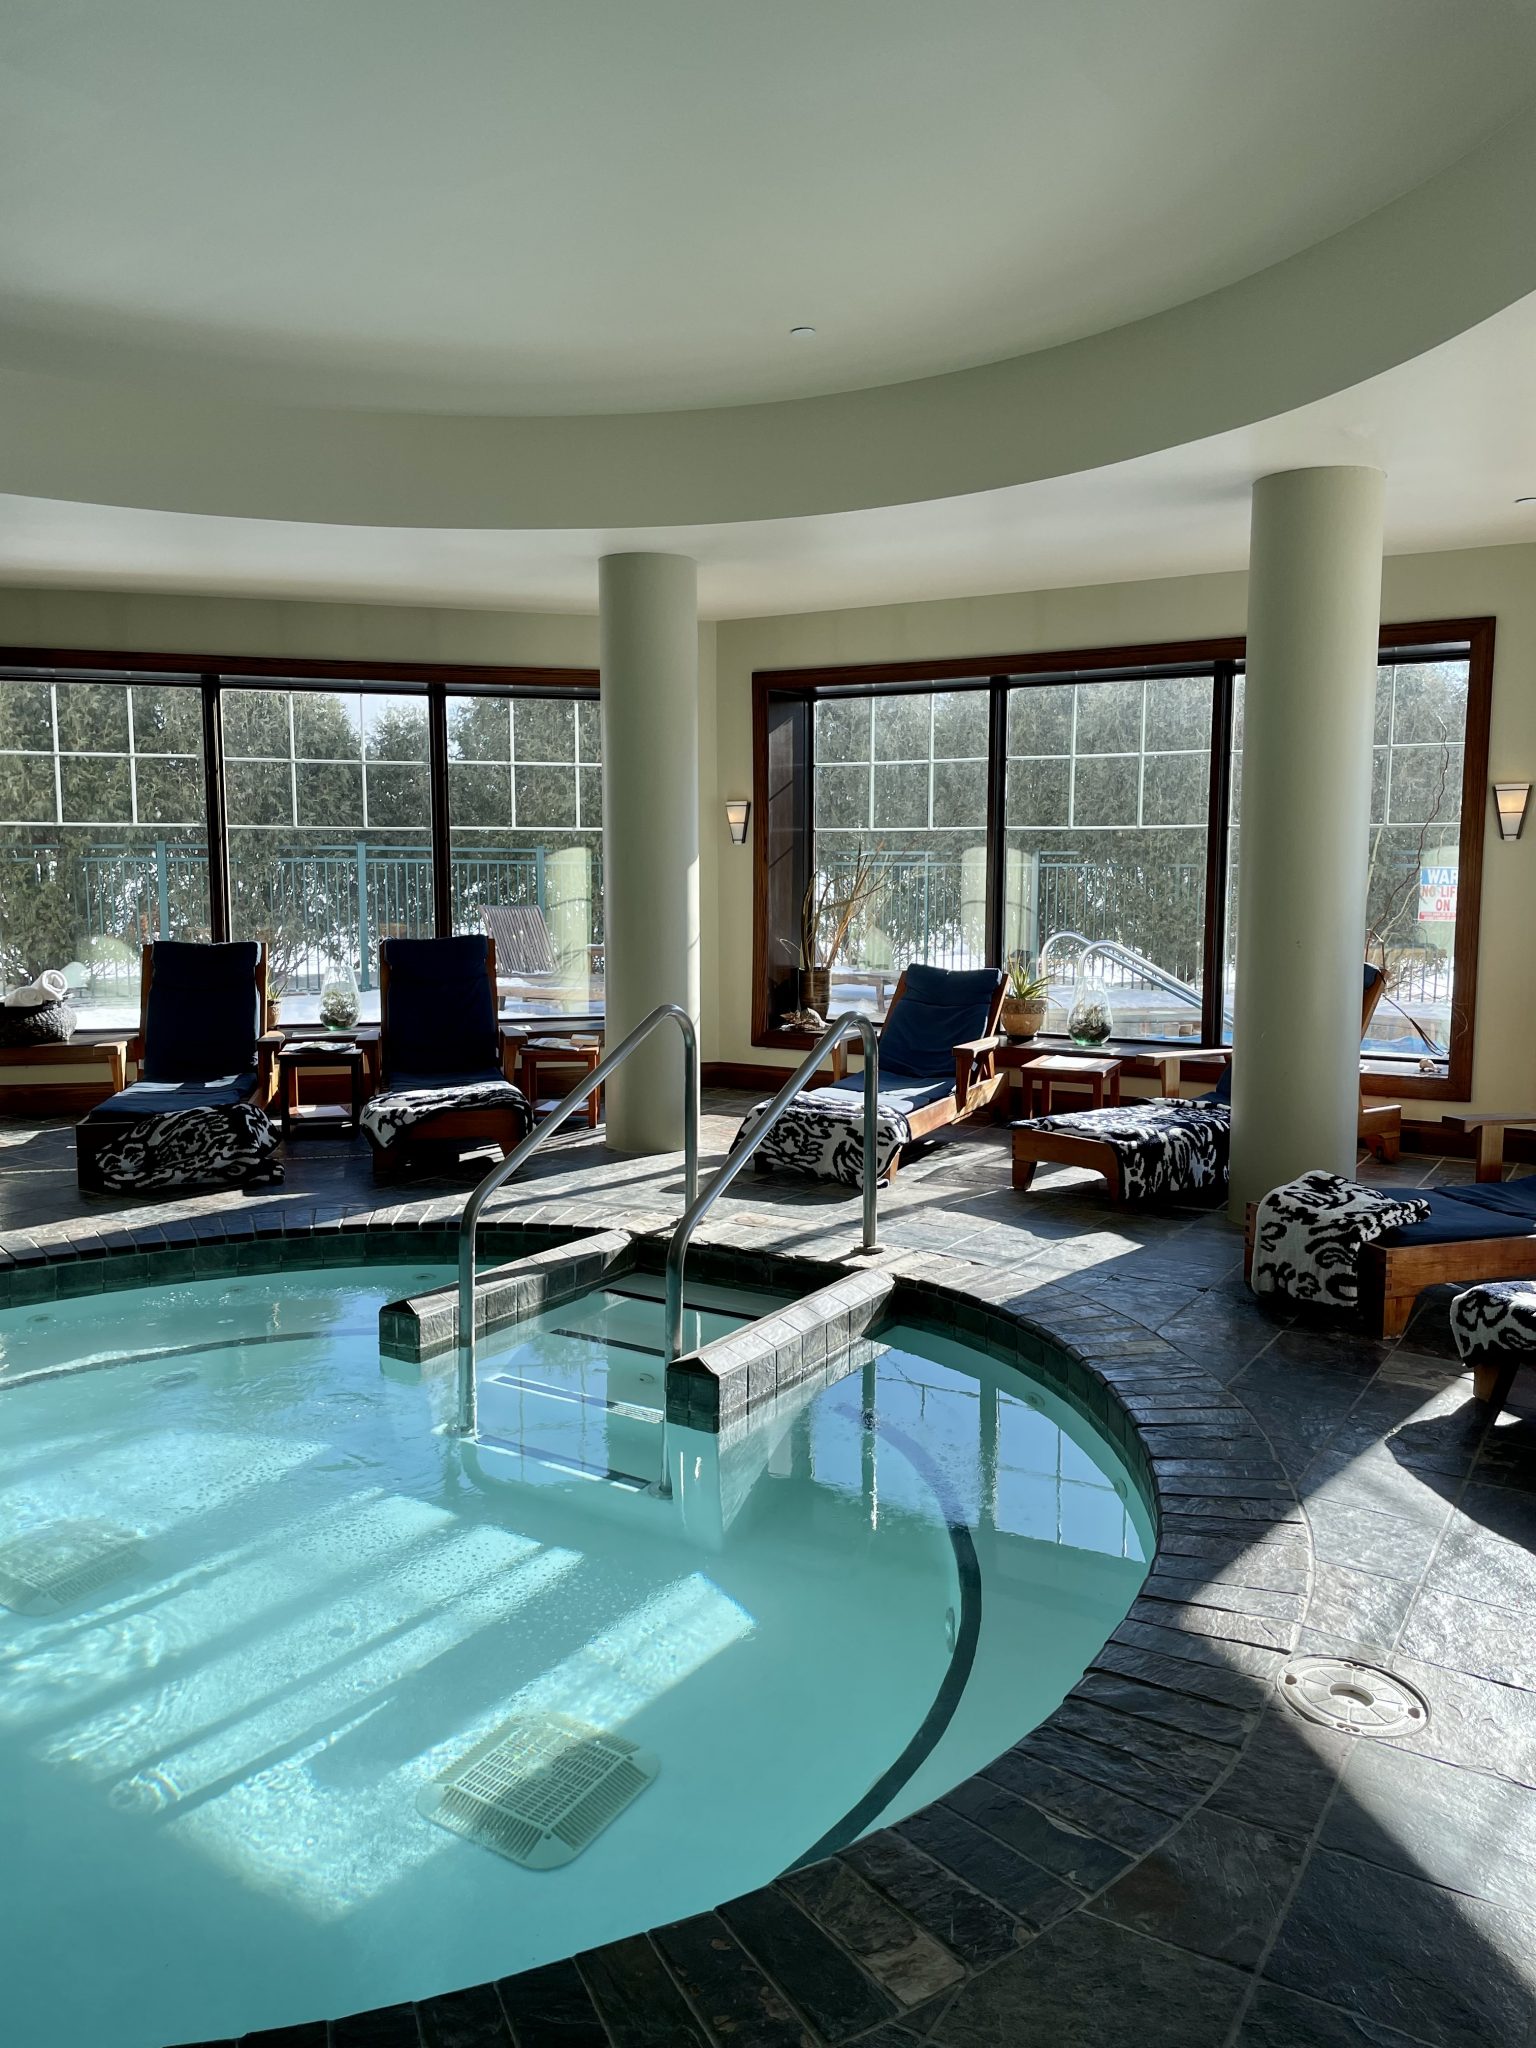 Honest Review of The Osthoff Resort in Elkhart Lake, Wisconsin